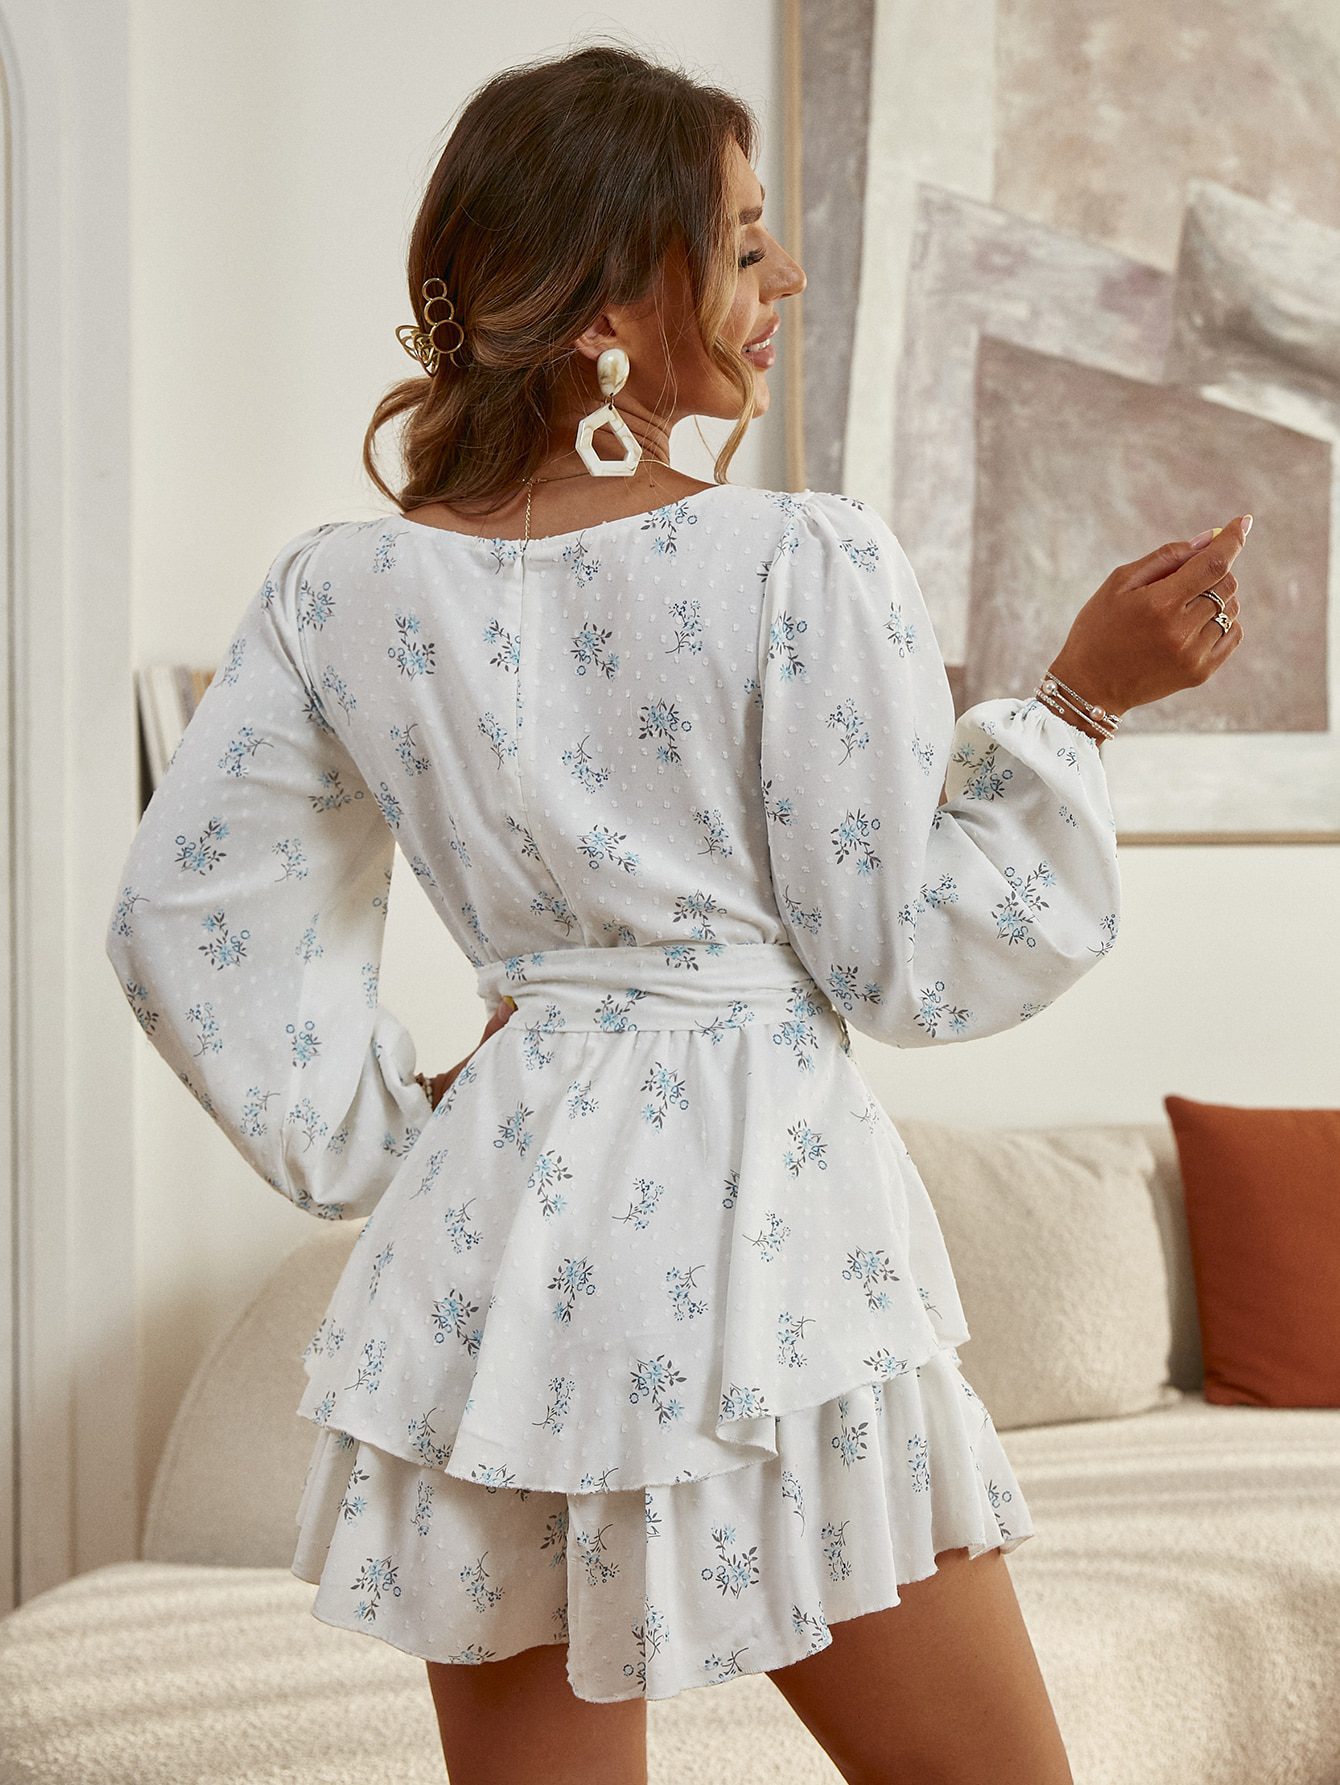 Sash Long Sleeve Ruffle Print Lace Up Floral A-Line V-Neck Romper Jumpsuit in Jumpsuits & Rompers